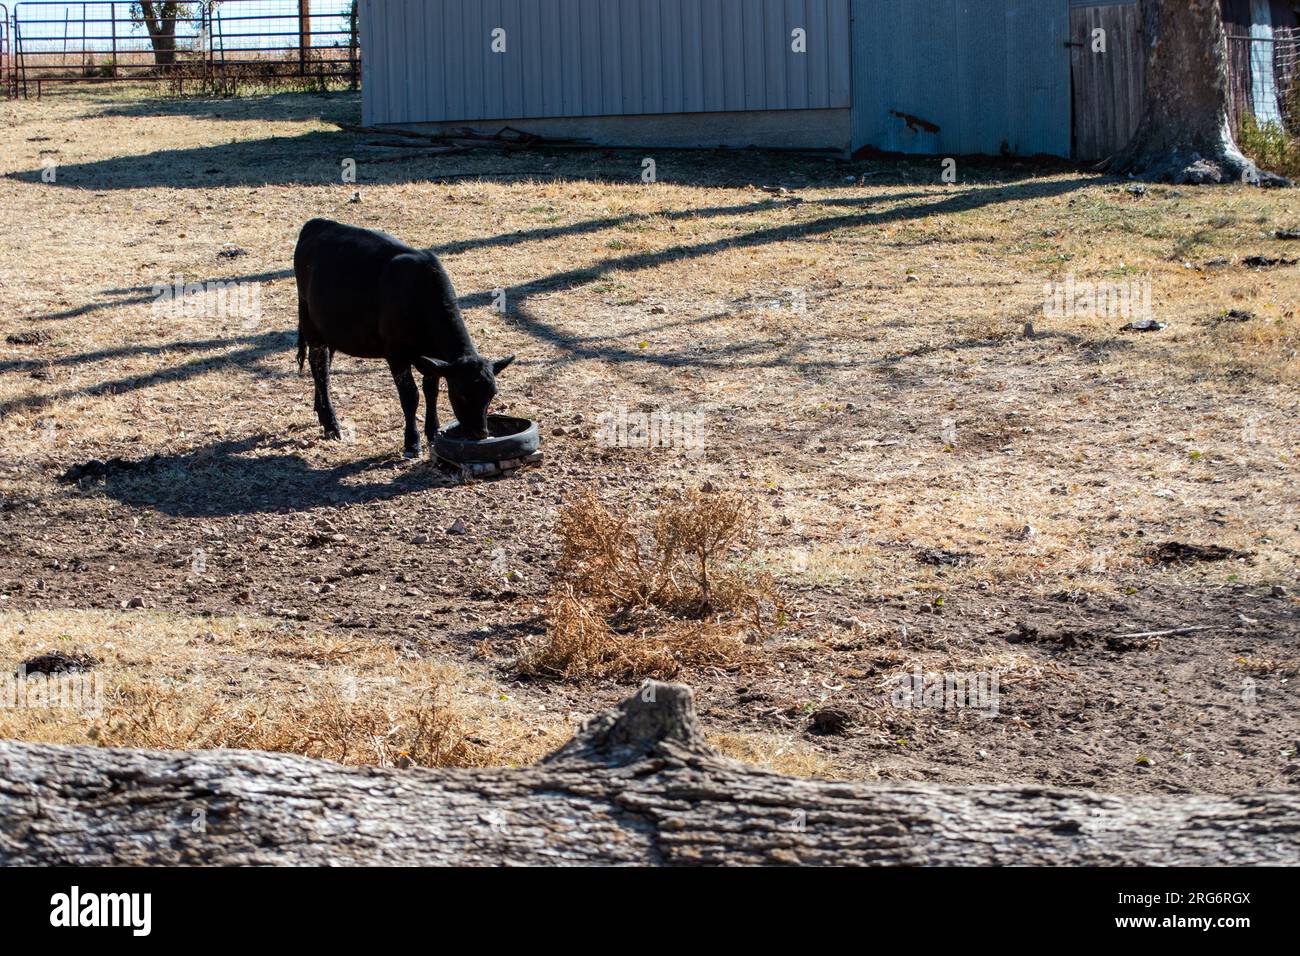 A black angus calf licks a mineral block placed inside an old tire. Defocused foreground. Stock Photo